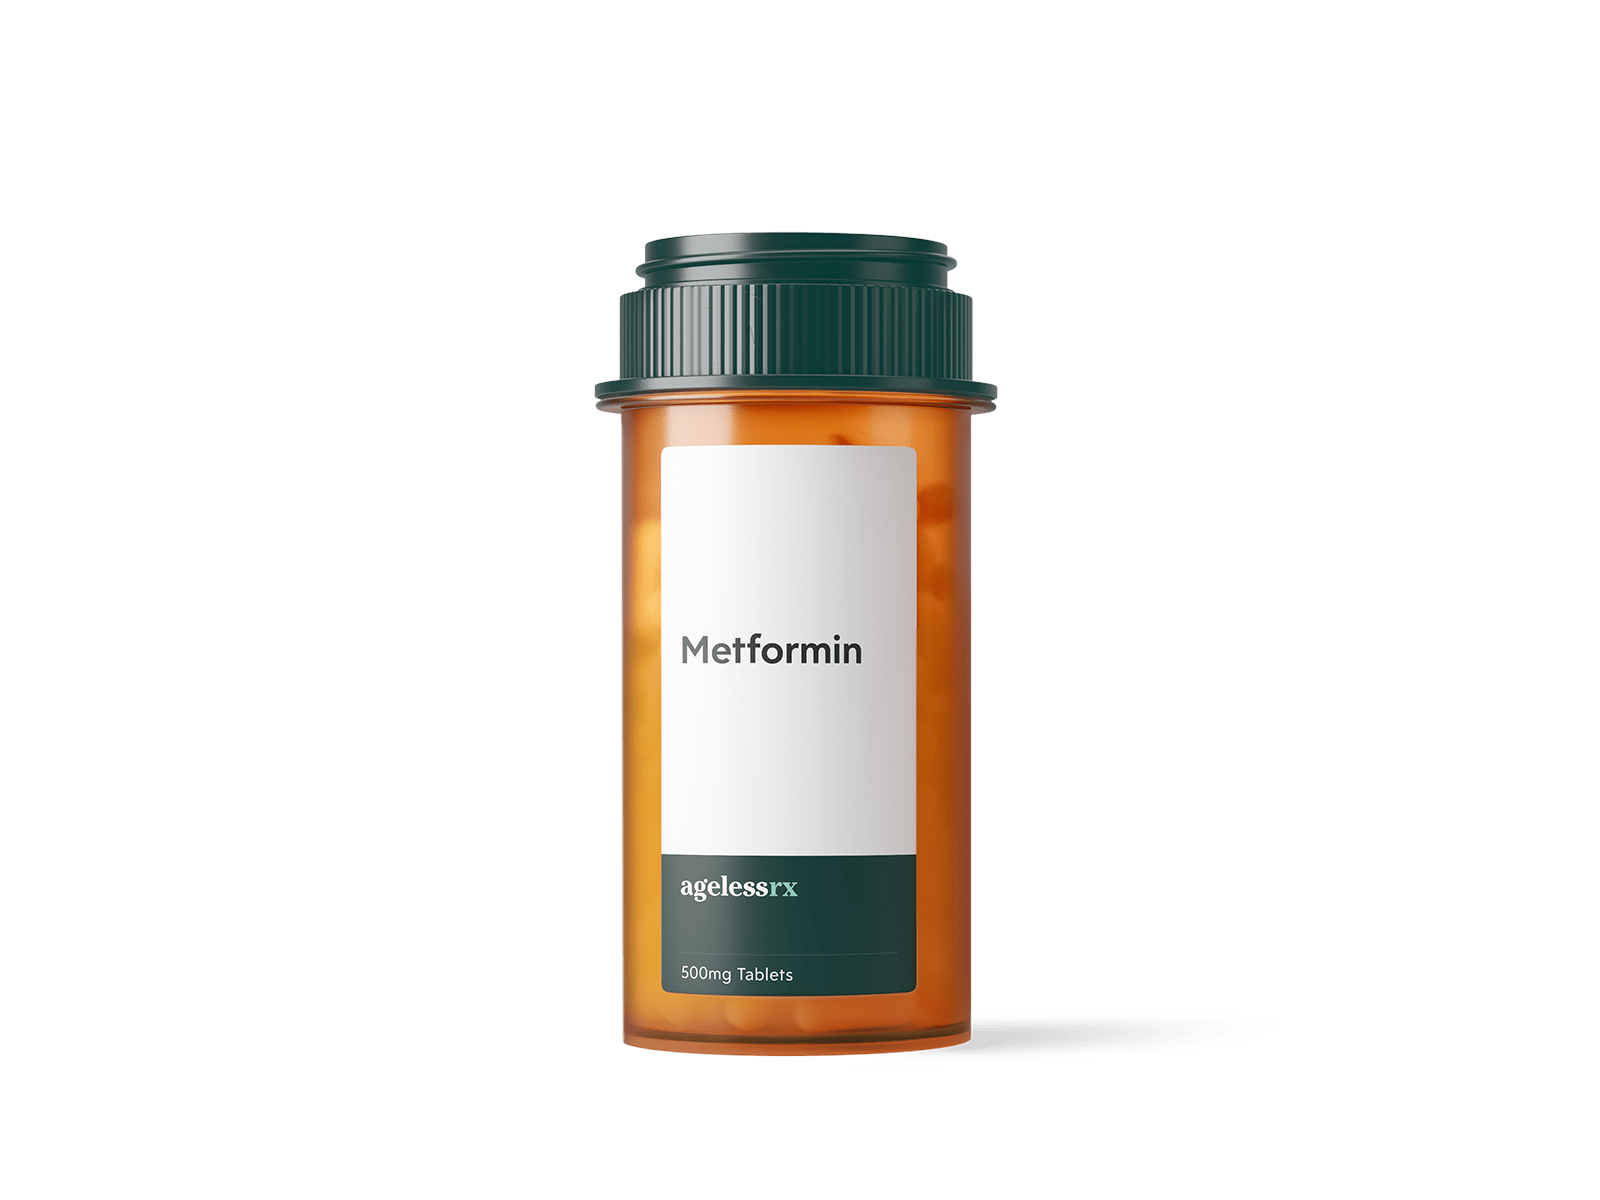 Product image for Metformin